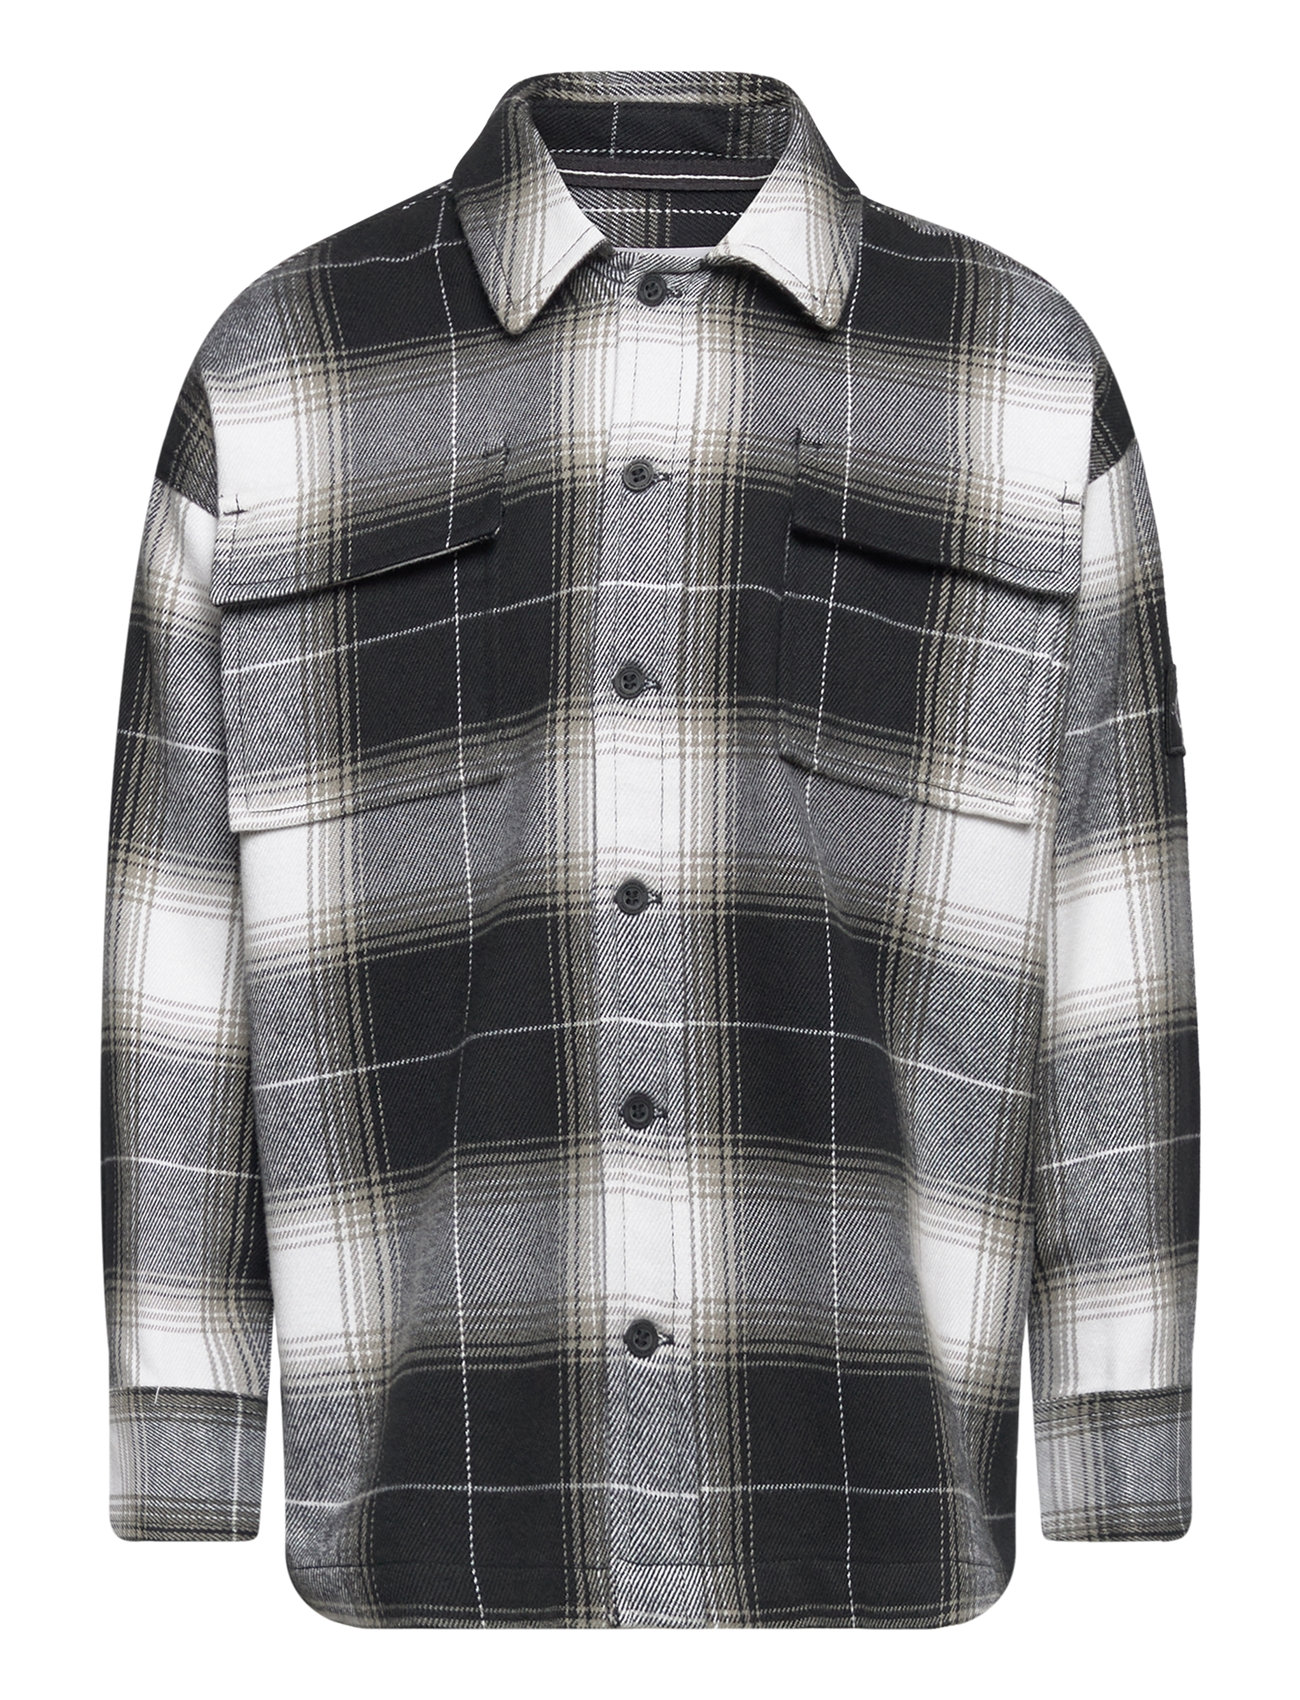 Checked Flannel Overshirt Tops Shirts Long-sleeved Shirts Black Calvin Klein